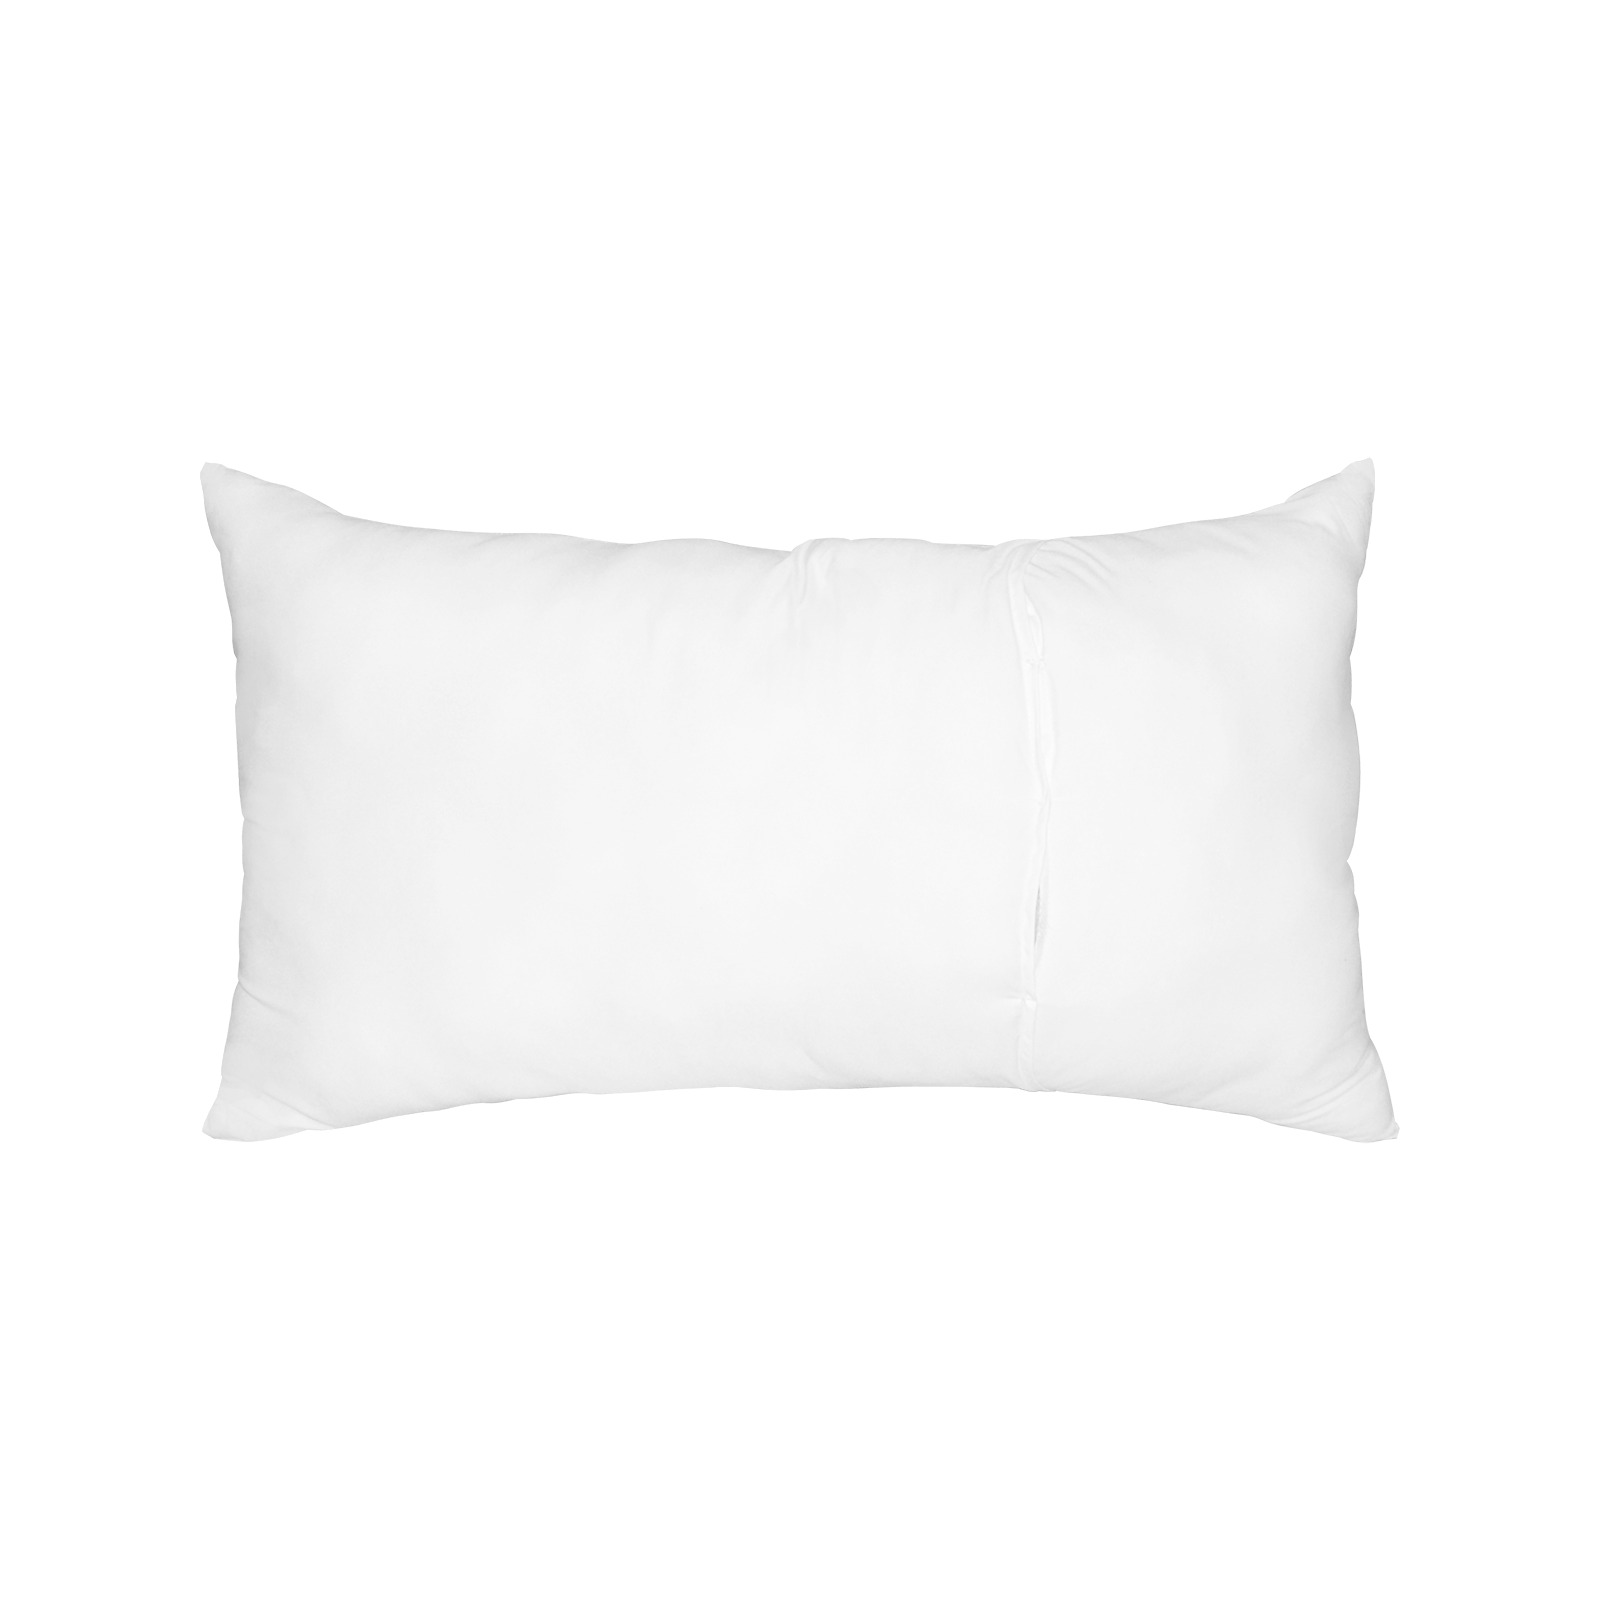 for accupuncture regions. Custom Pillow Case 20"x 36" (One Side) (Set of 2)